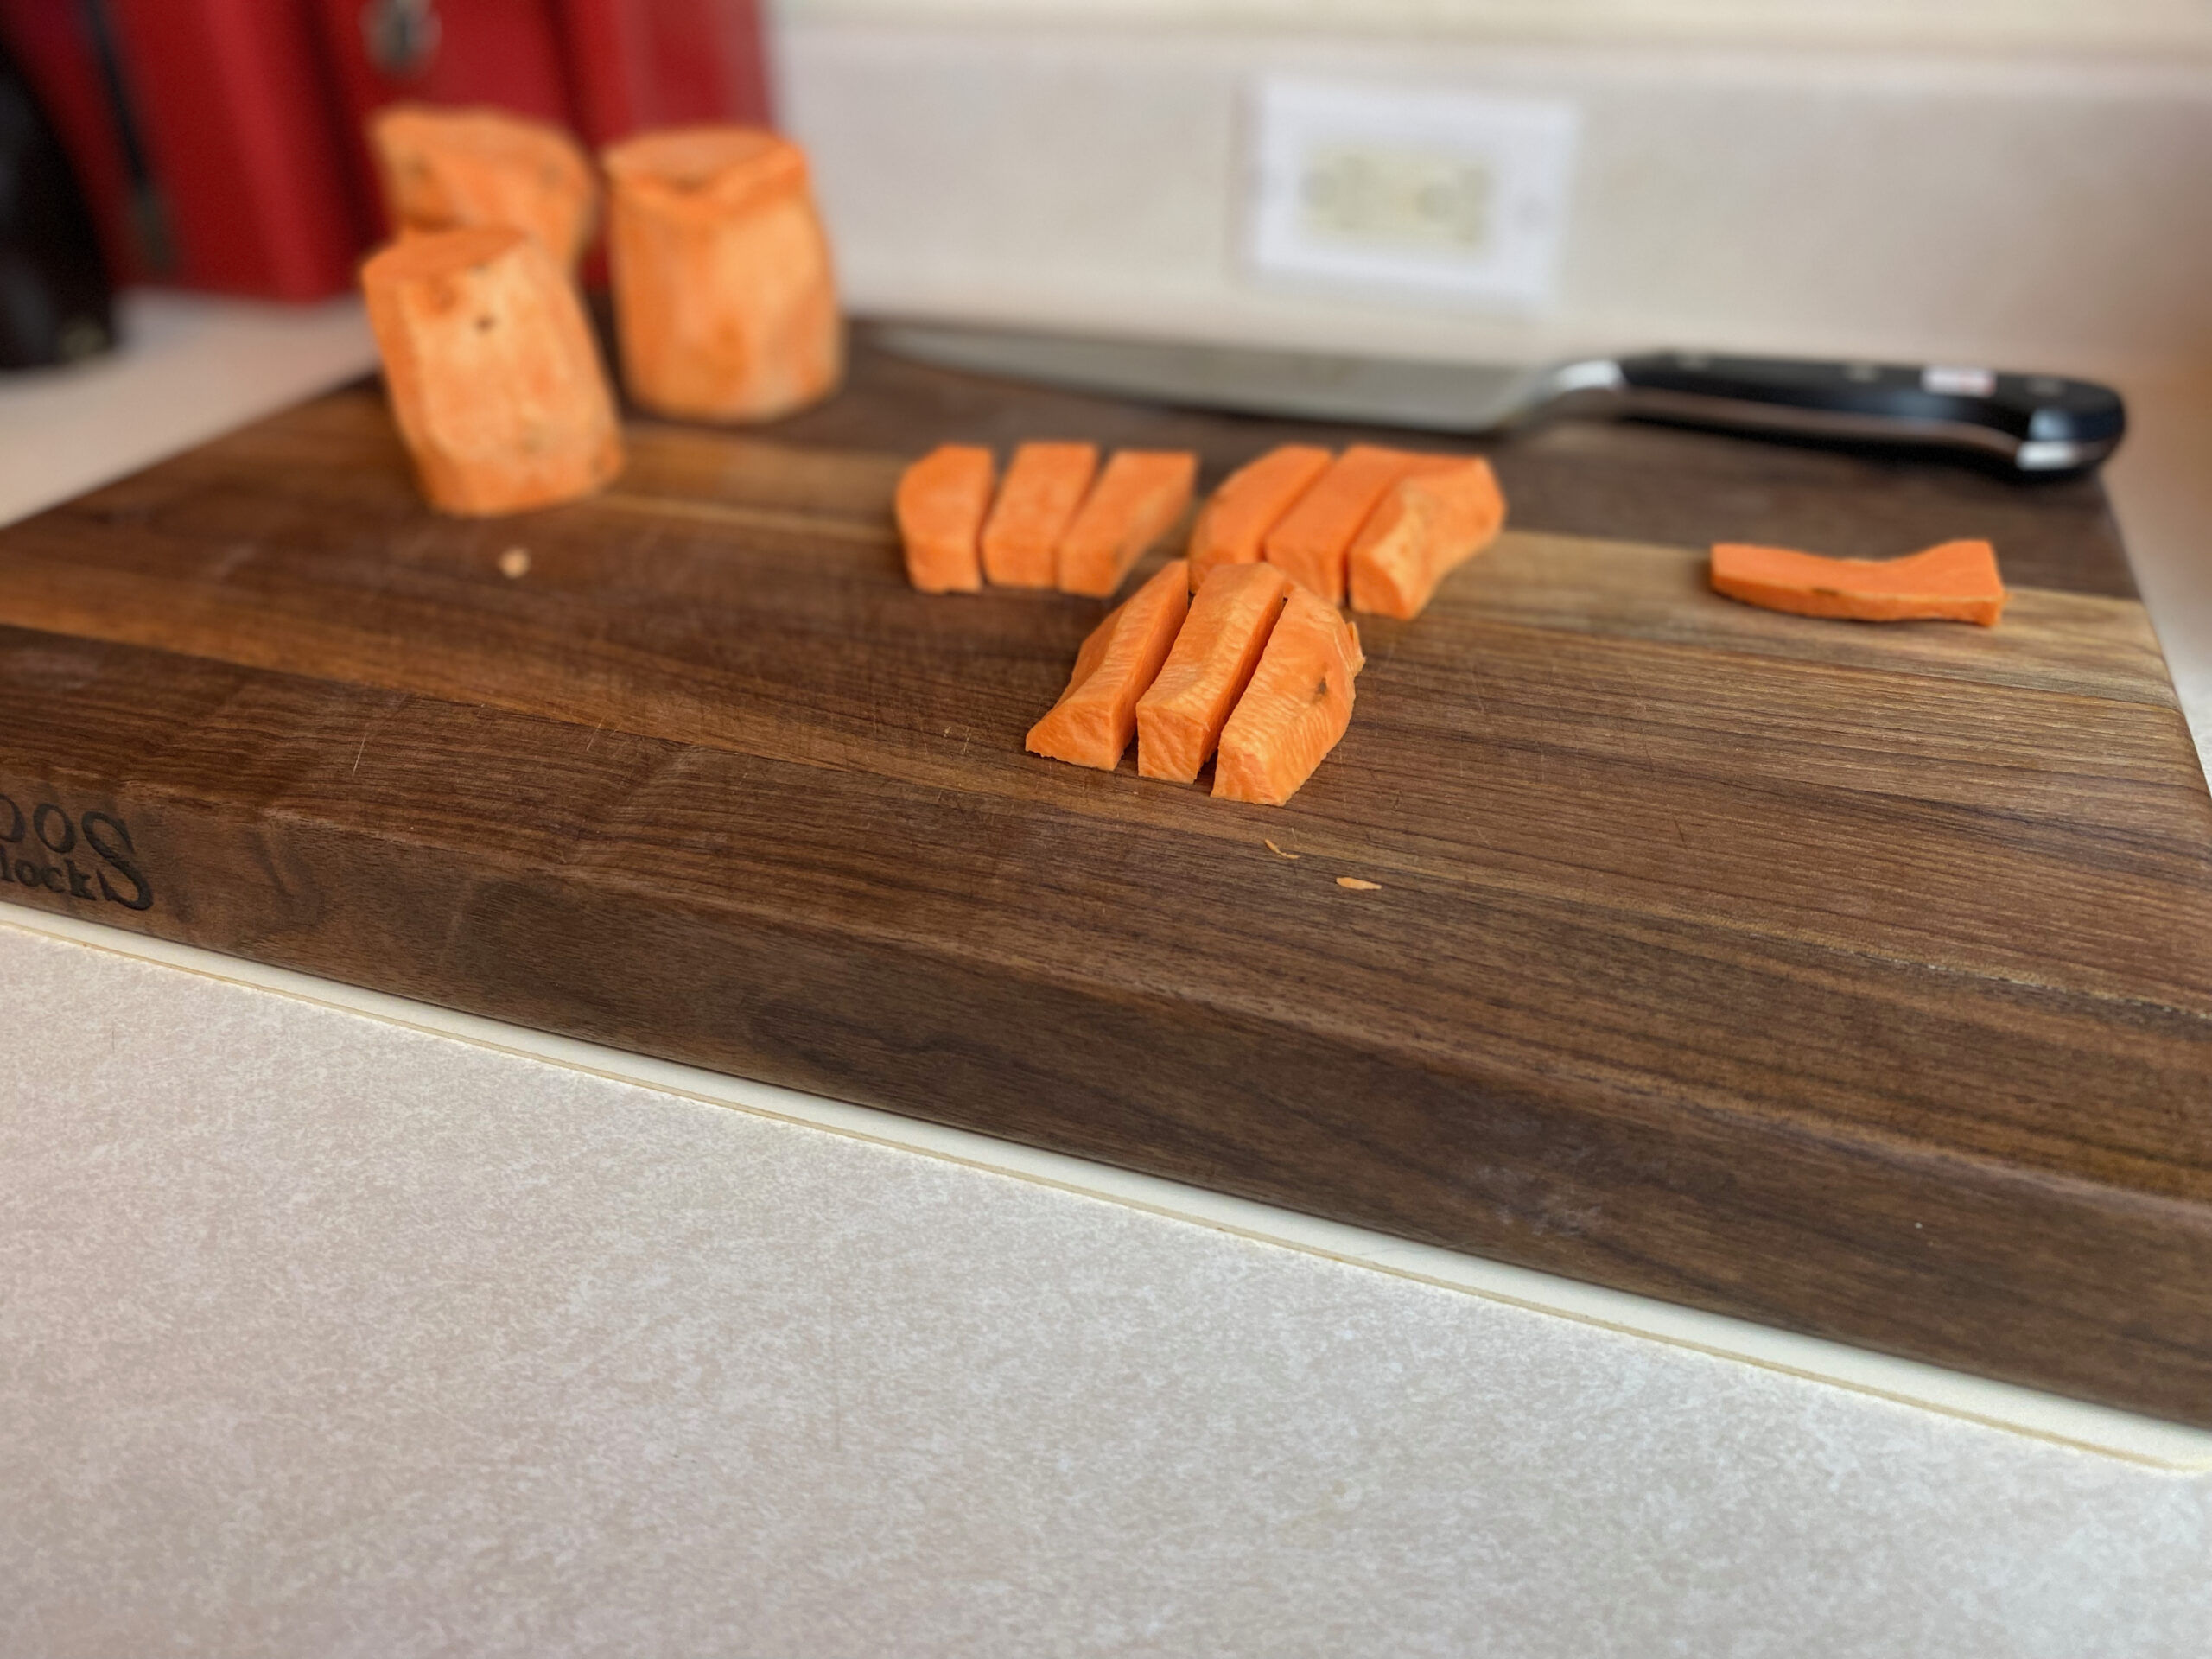 uncooked sweet potato fries on a cutting board